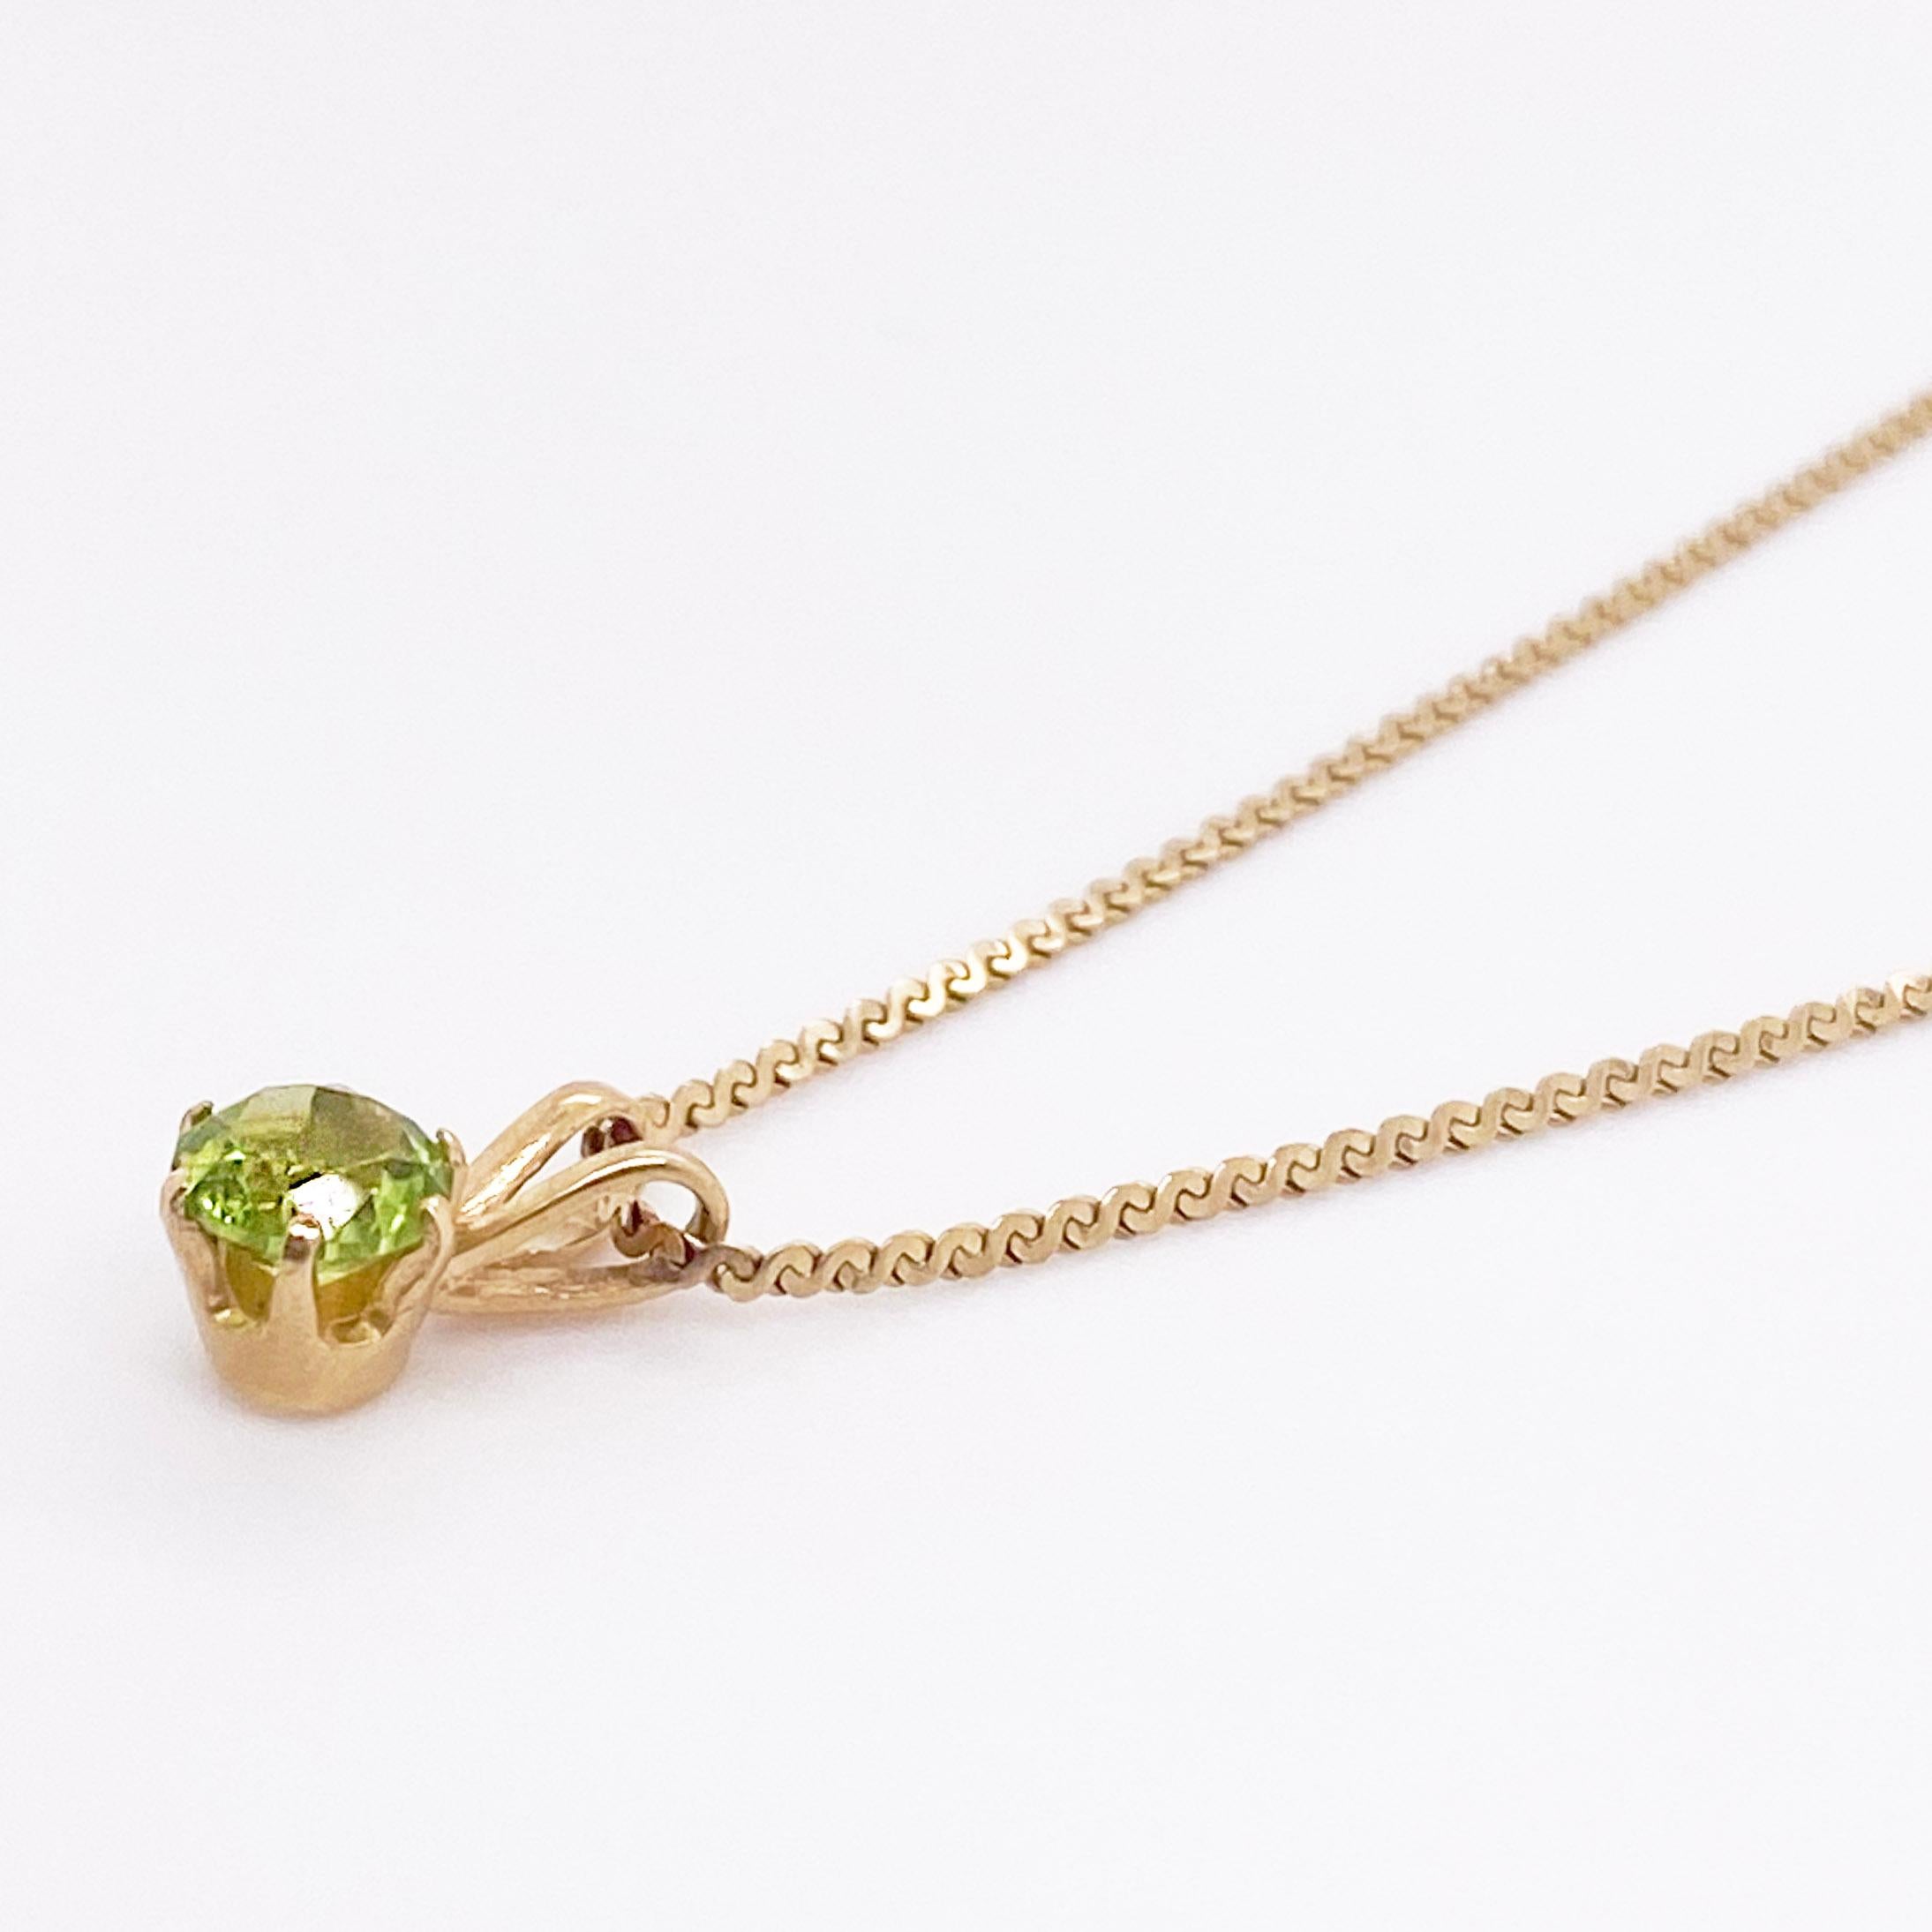 The round peridot is modest at 1/2 carat in a six prong setting set in solid 14 karat yellow gold. The chain is the coveted serpentine (S design) that is nice and strong at 1.2 millimeters wide. This chain will be attractive by itself or with any